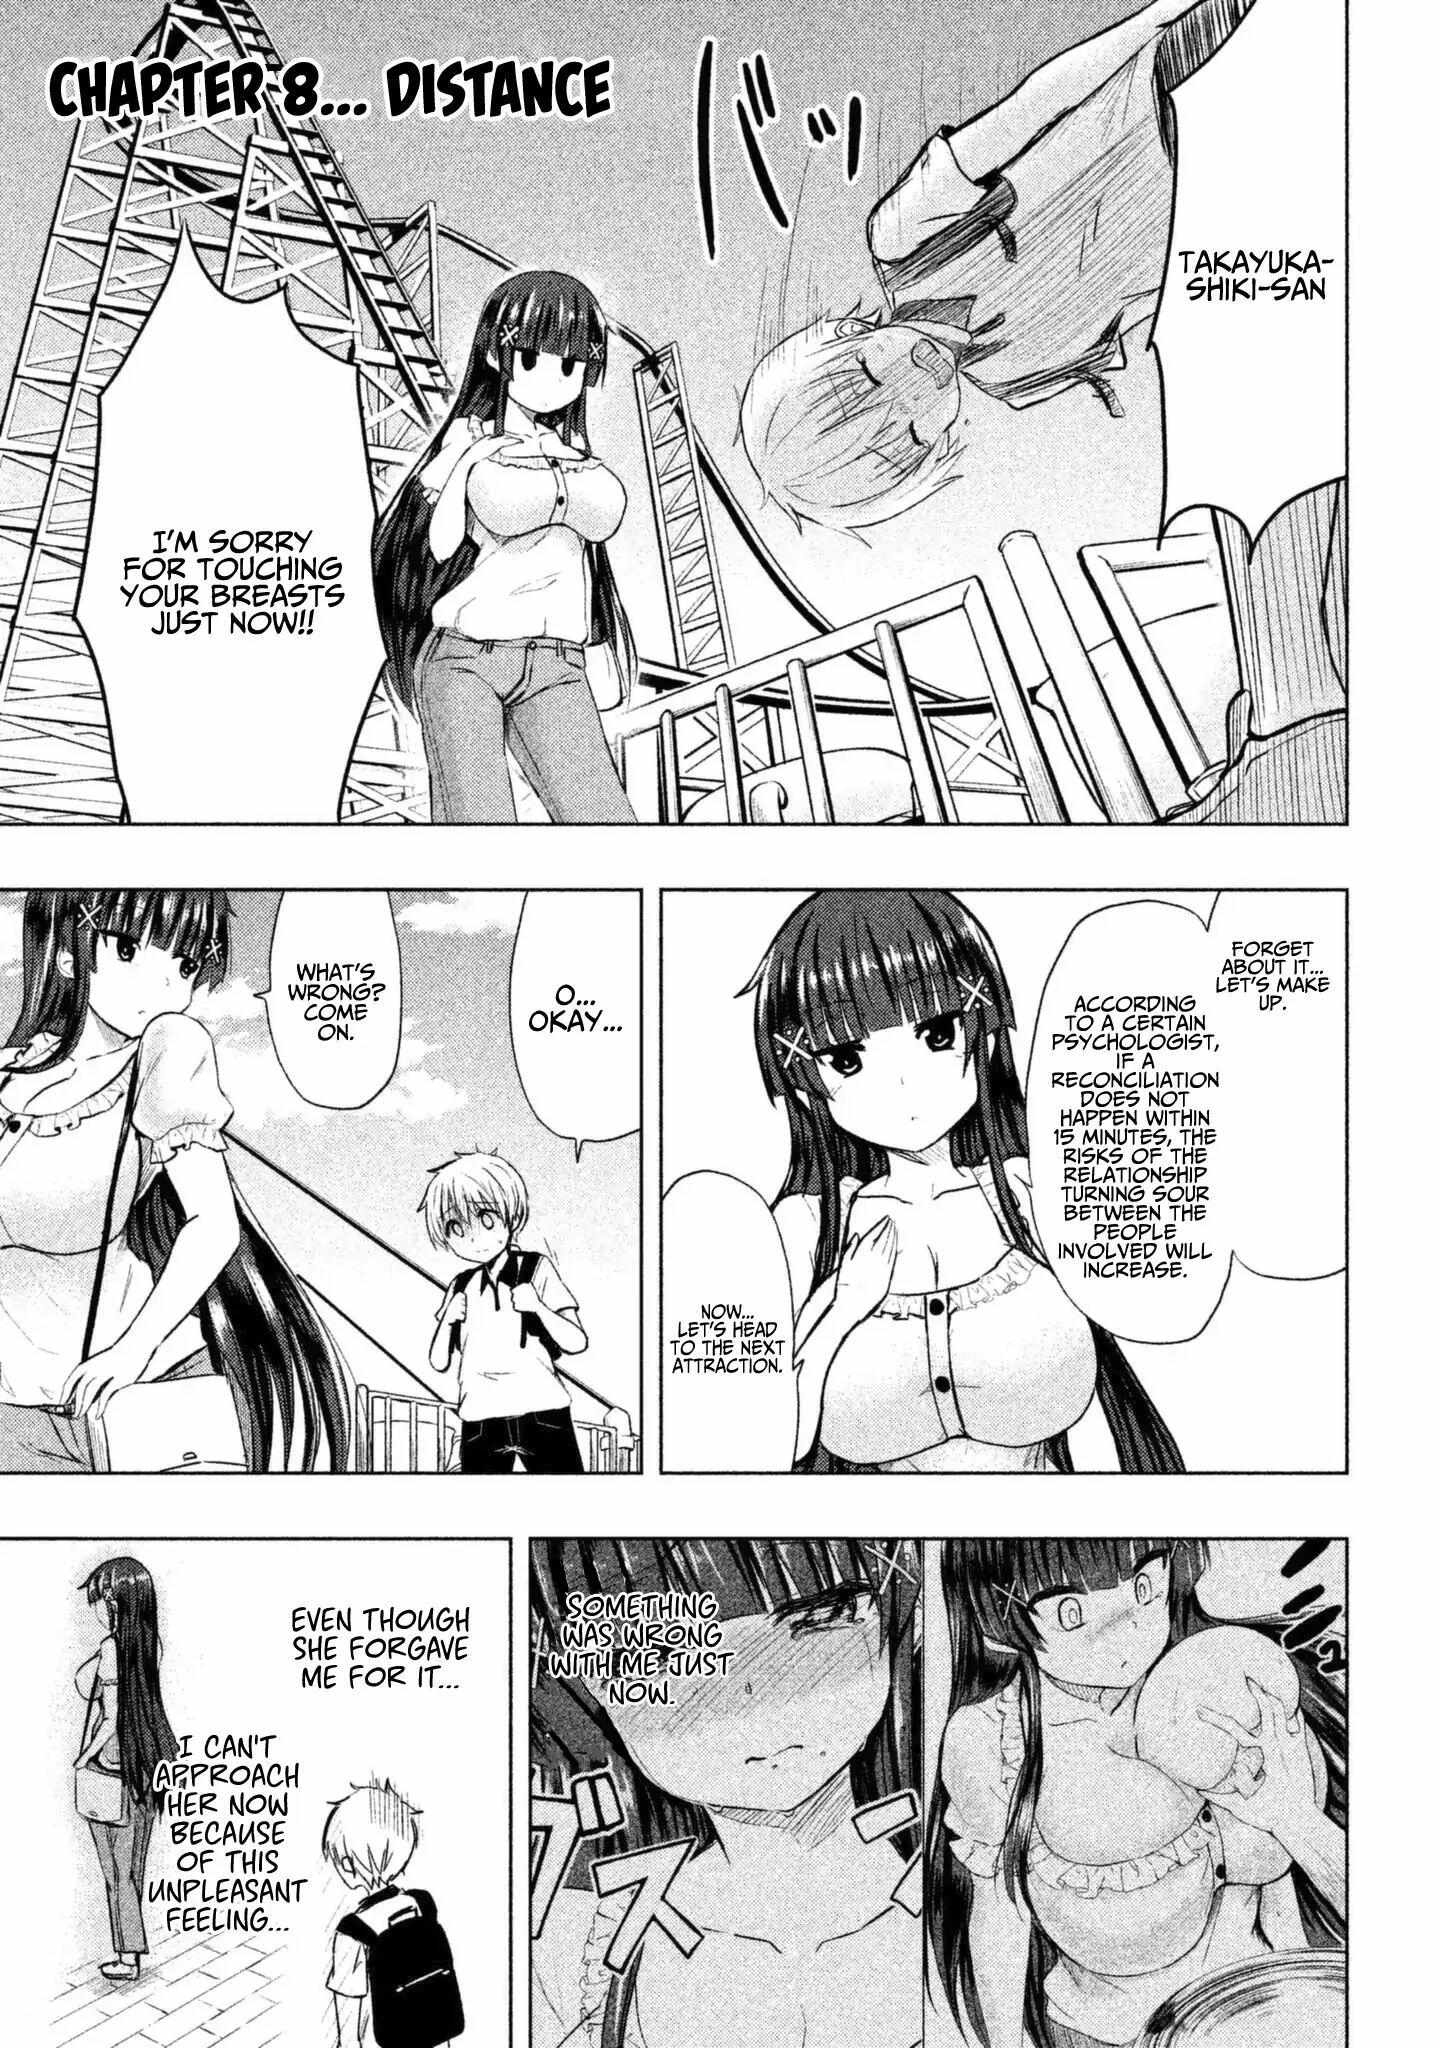 A Girl Who Is Very Well-Informed About Weird Knowledge, Takayukashiki Souko-San Vol.1 Chapter 8: Distance page 2 - Mangakakalots.com